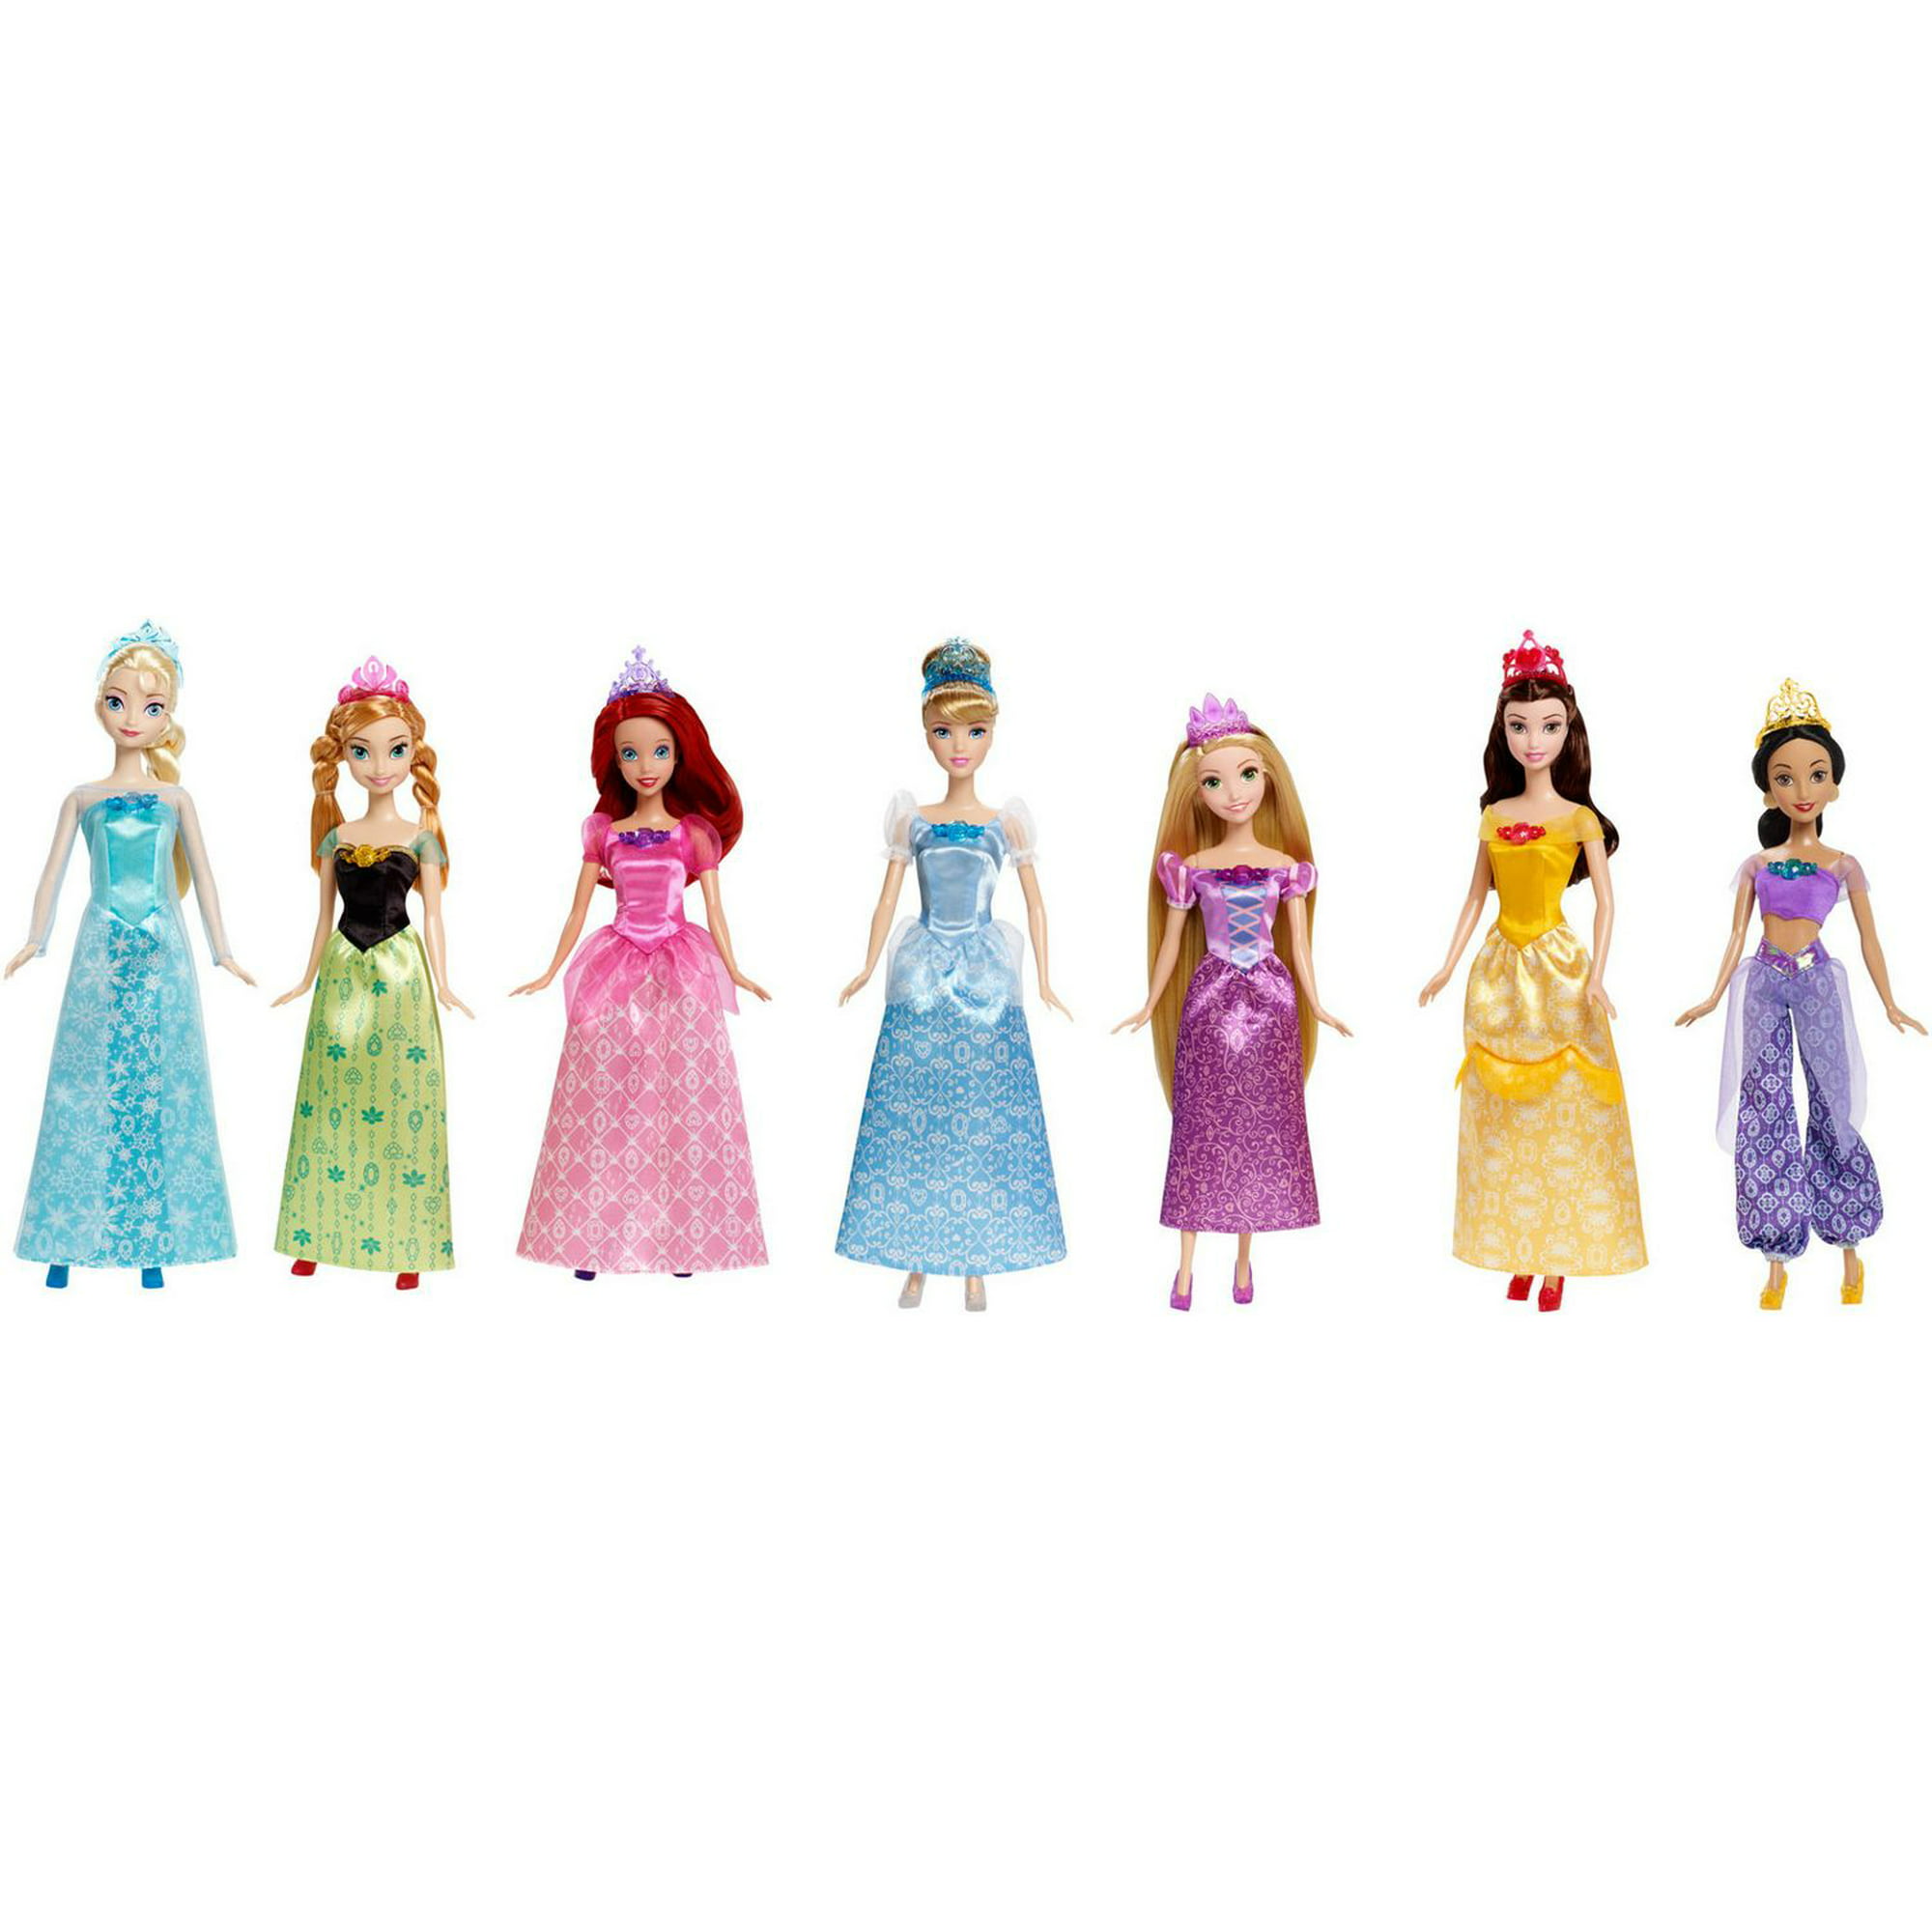 Disney Princess Doll Collection - 7 Pack 